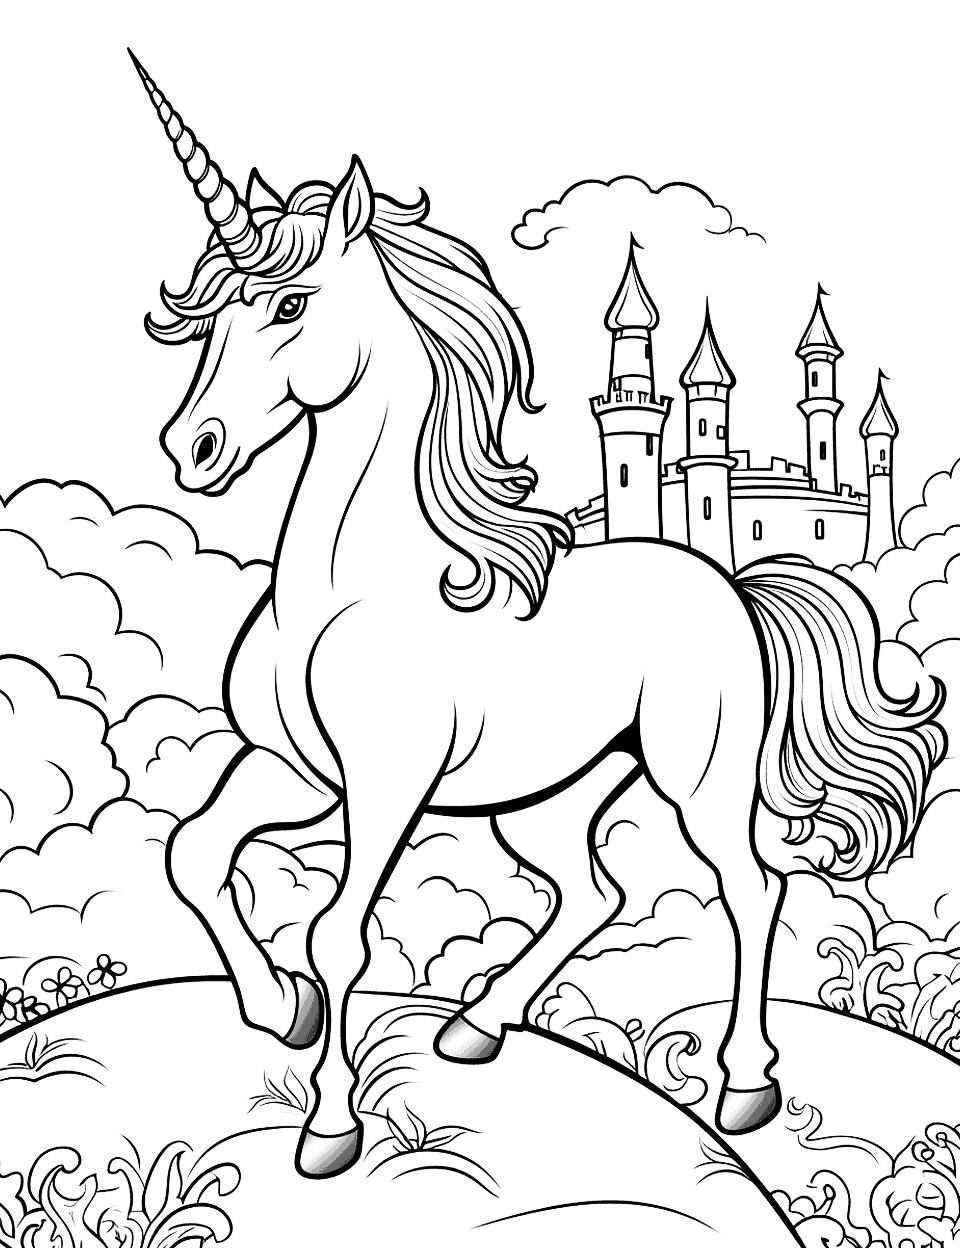 Unicorn in a Fairy Tale Coloring Page - A unicorn starring in a fairy tale, with a beautiful castle in the background.